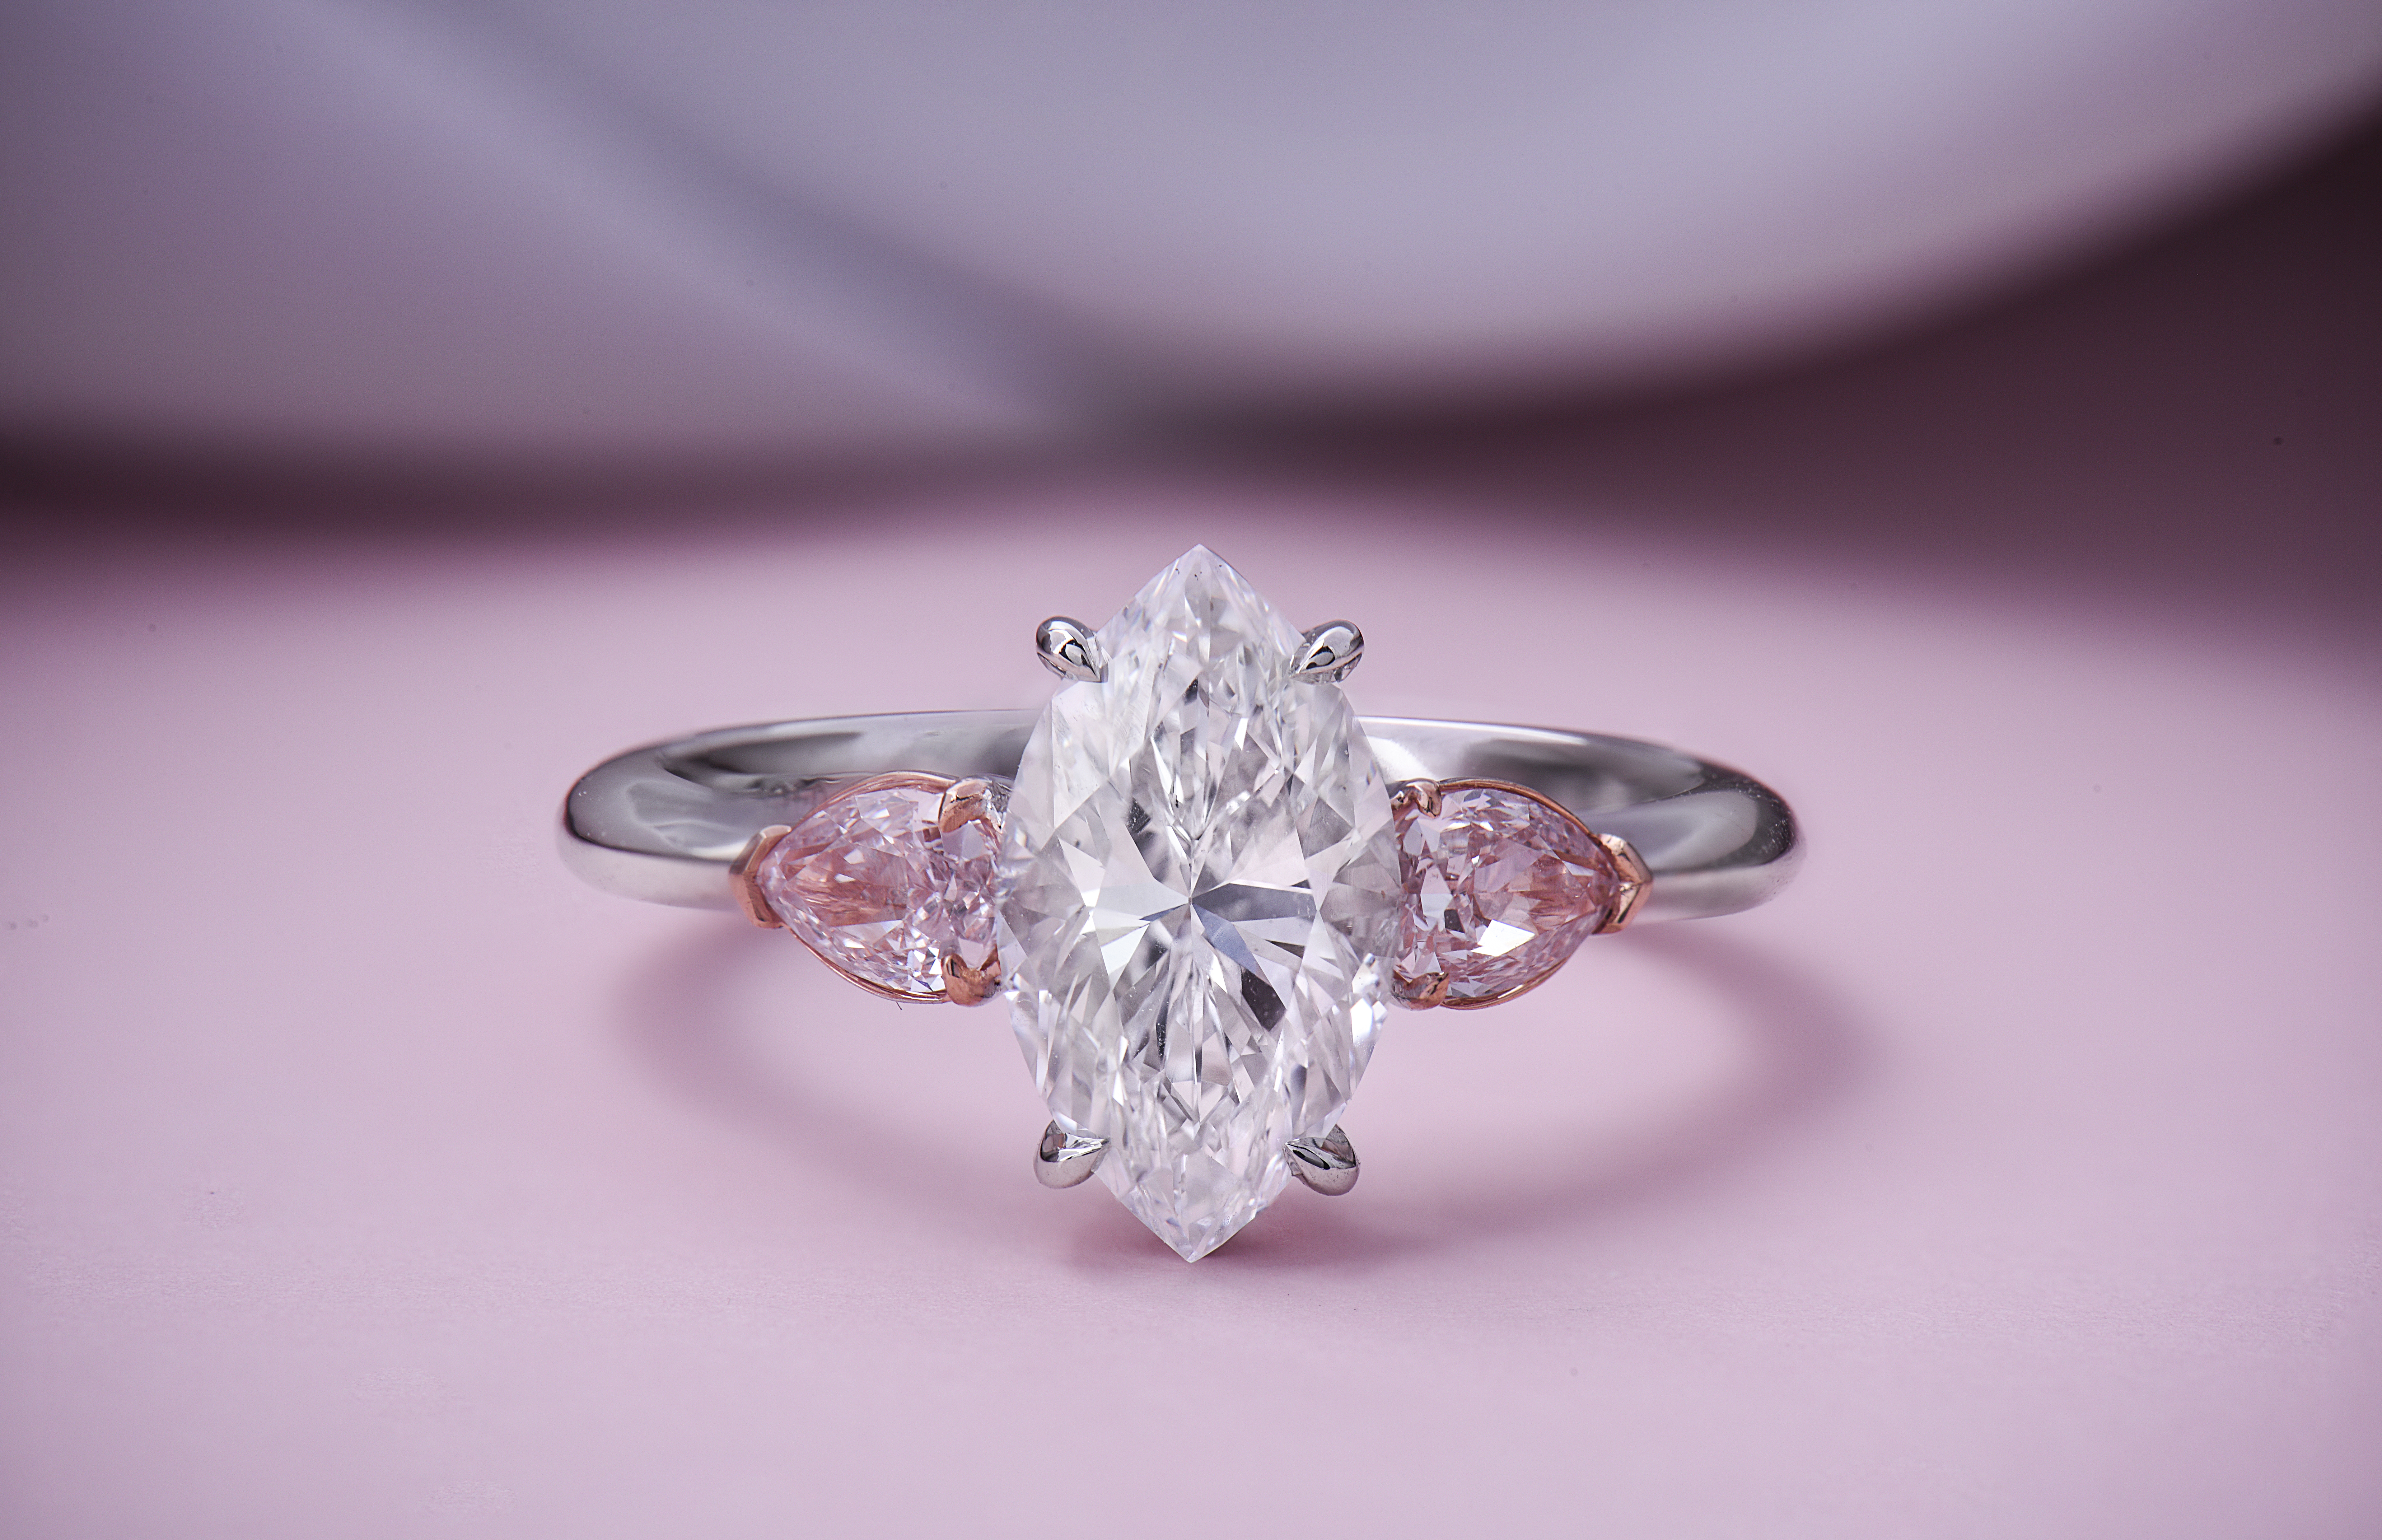 Pink Diamonds Prices Guide for investors and private collectors